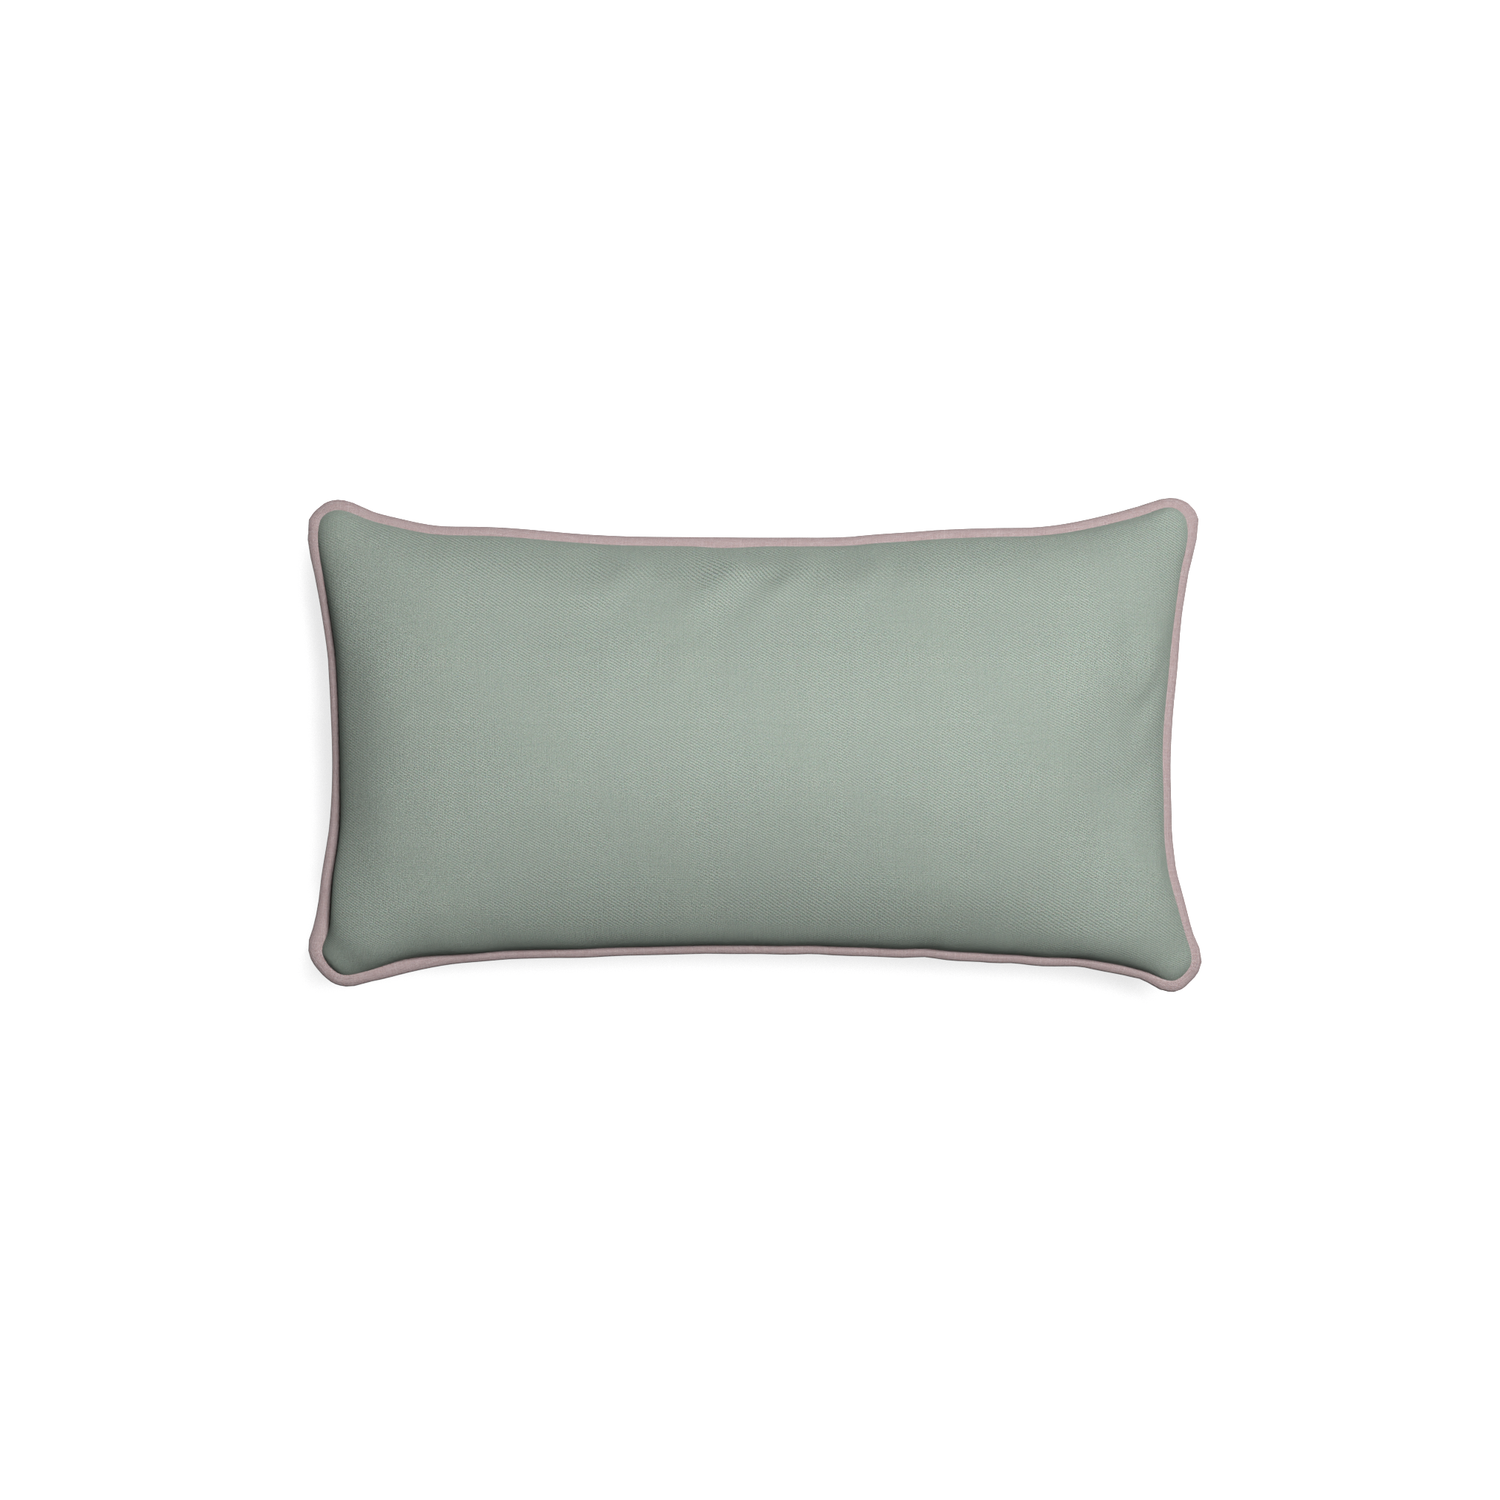 Petite-lumbar sage custom sage green cottonpillow with orchid piping on white background